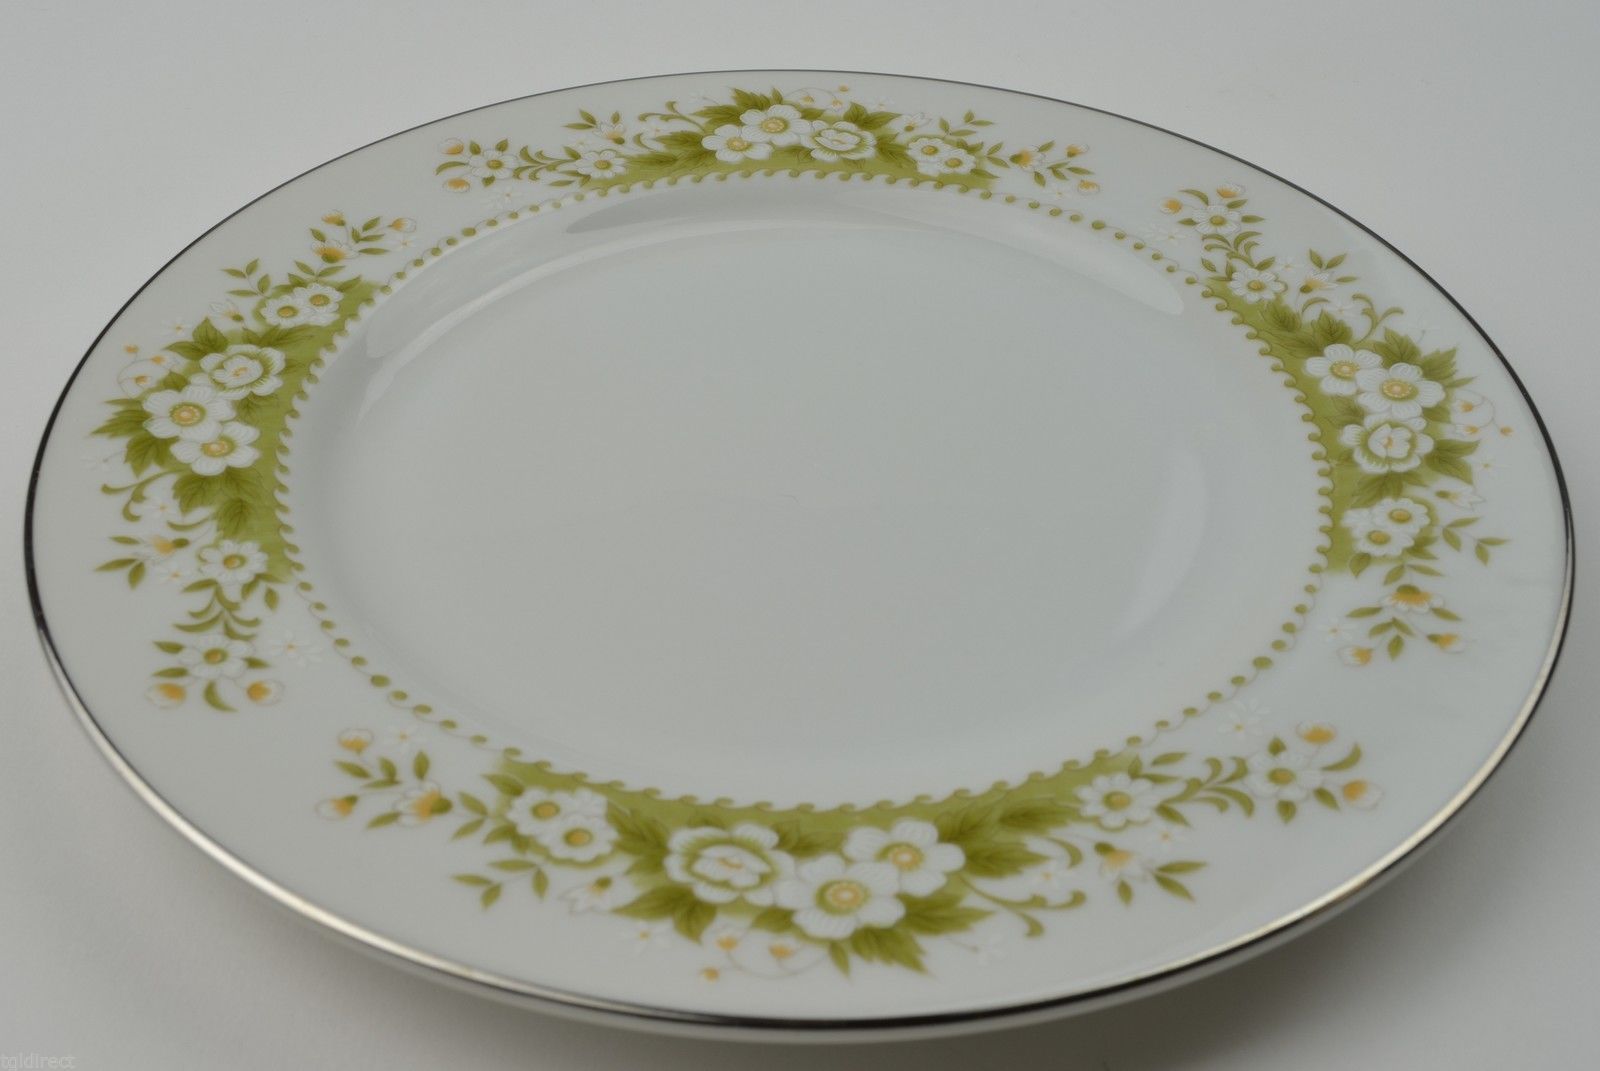 Primary image for Wellin Fine China Glendale Pattern Salad Plate 5756 Replacement Dinnerware Japan